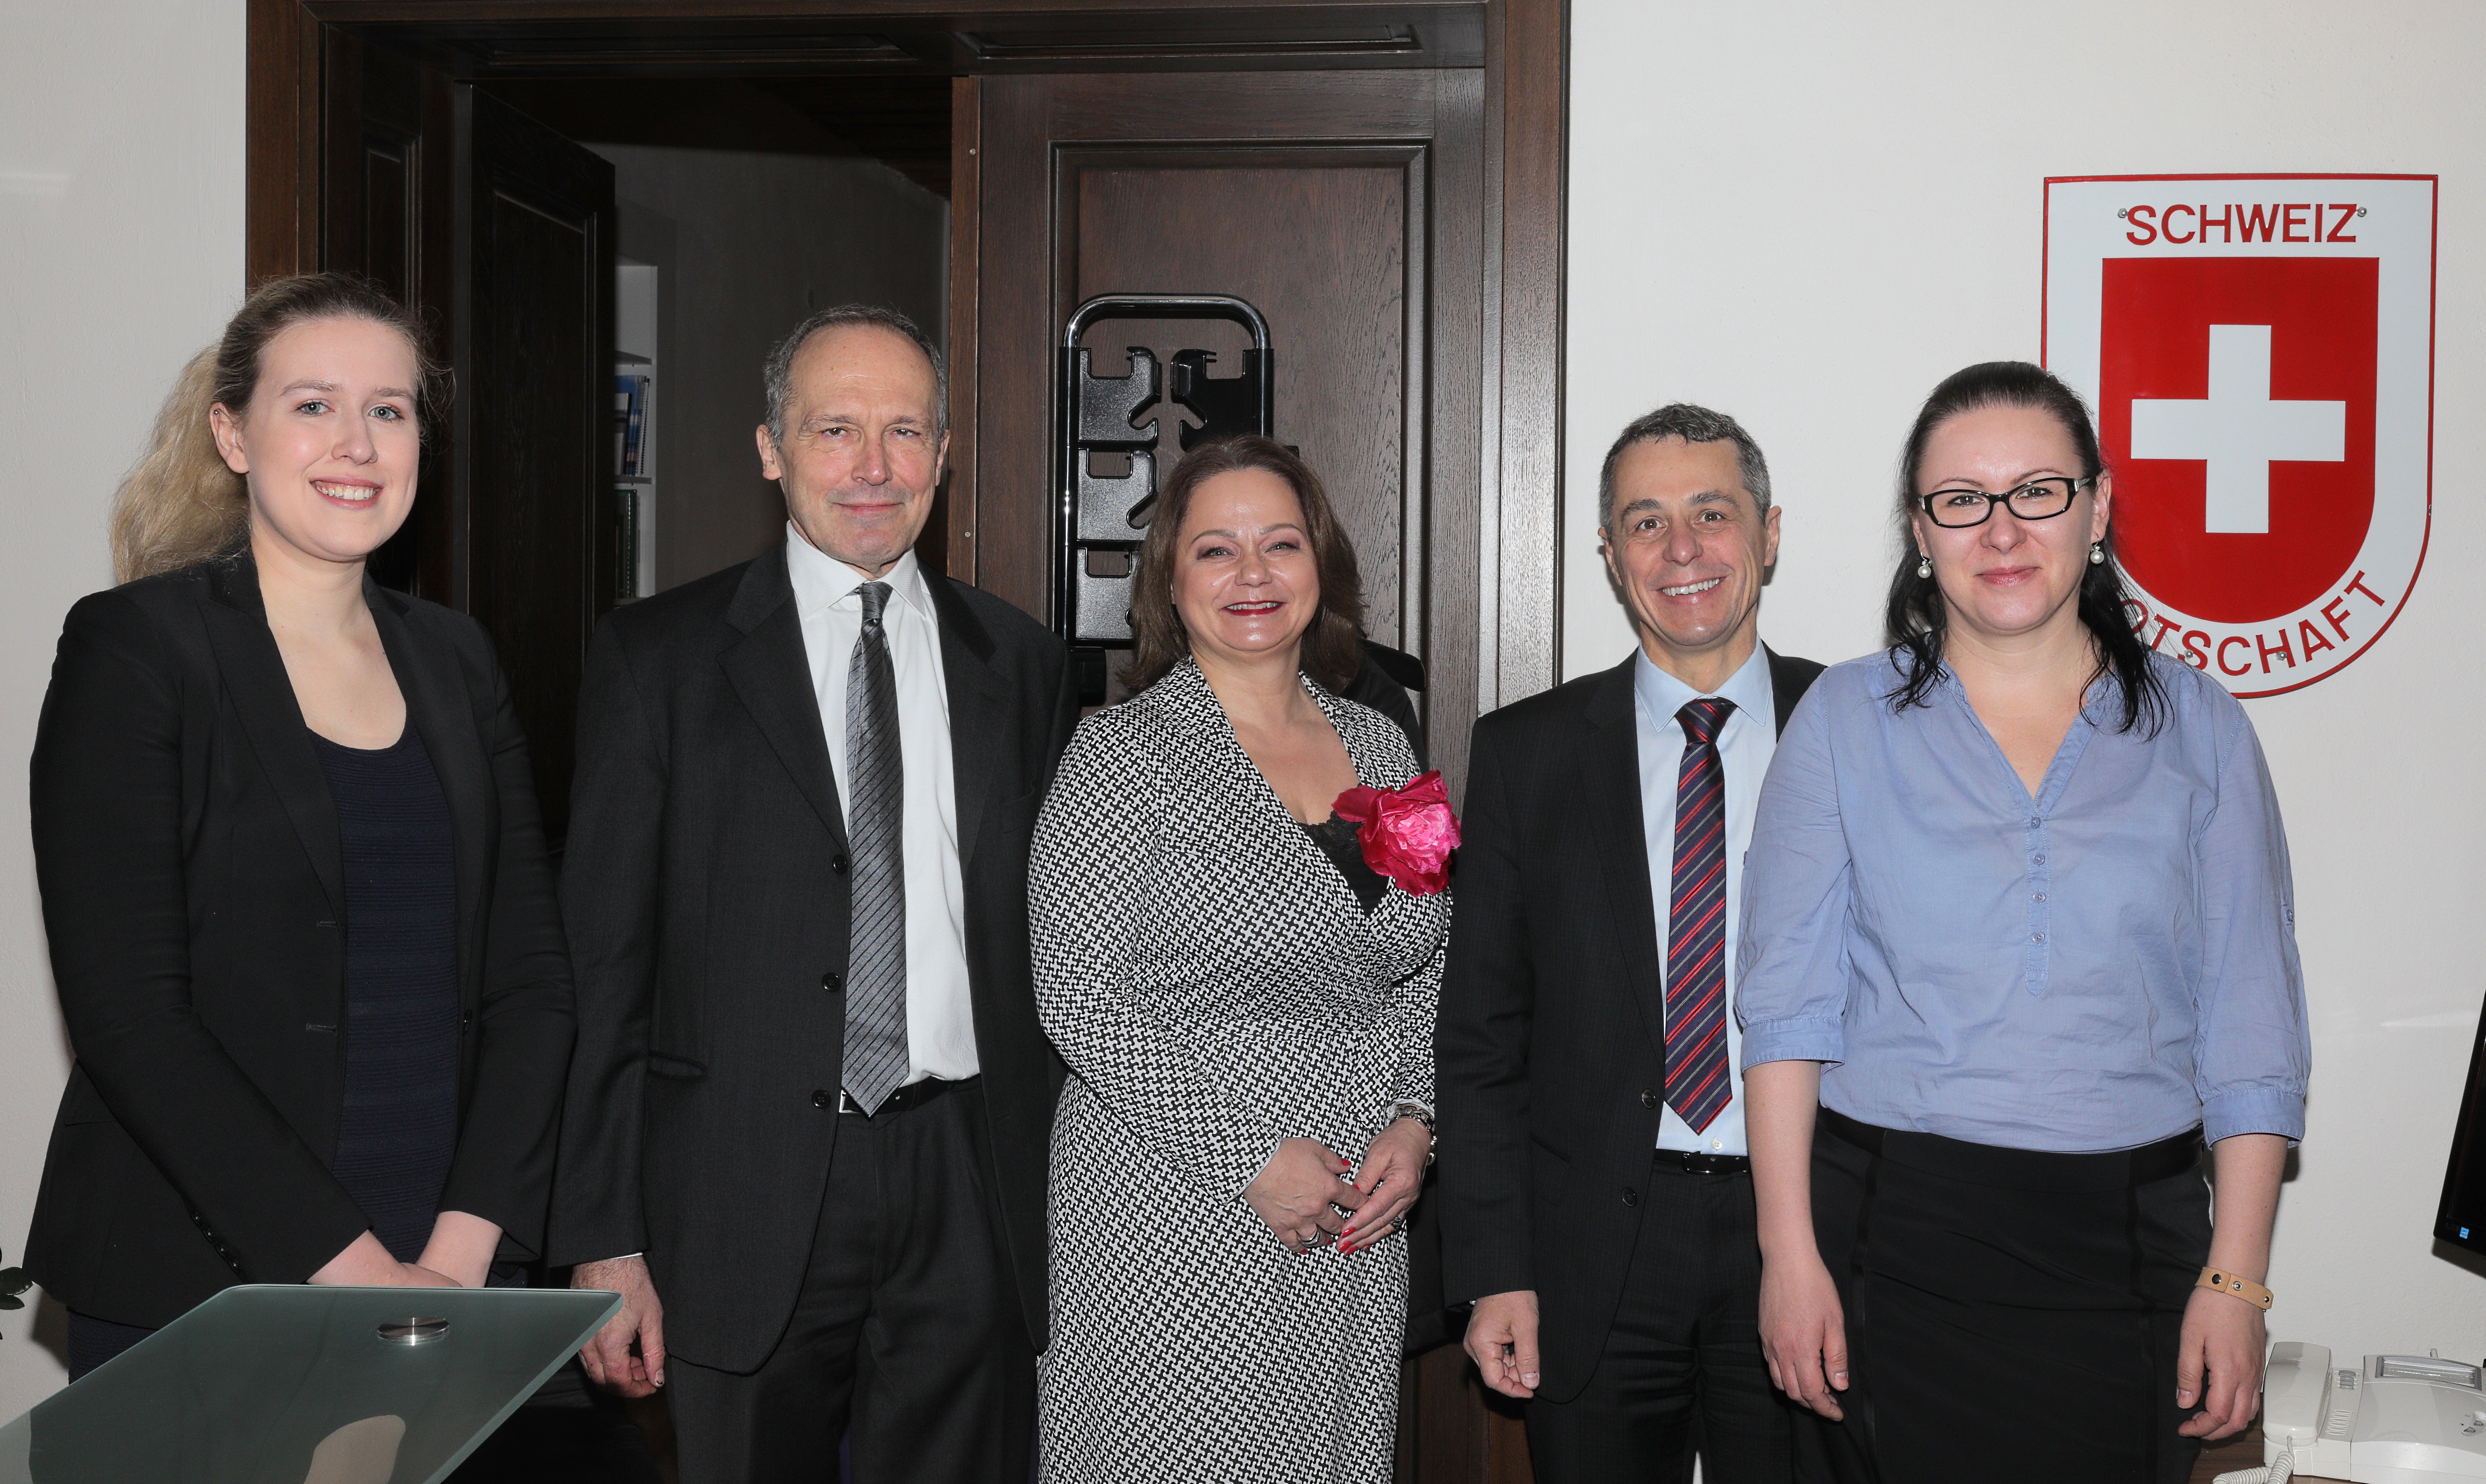 with Swiss Minister of Foreign Affairs Ignazio Cassis and members of his team at the Swiss Embassy in Bratislava